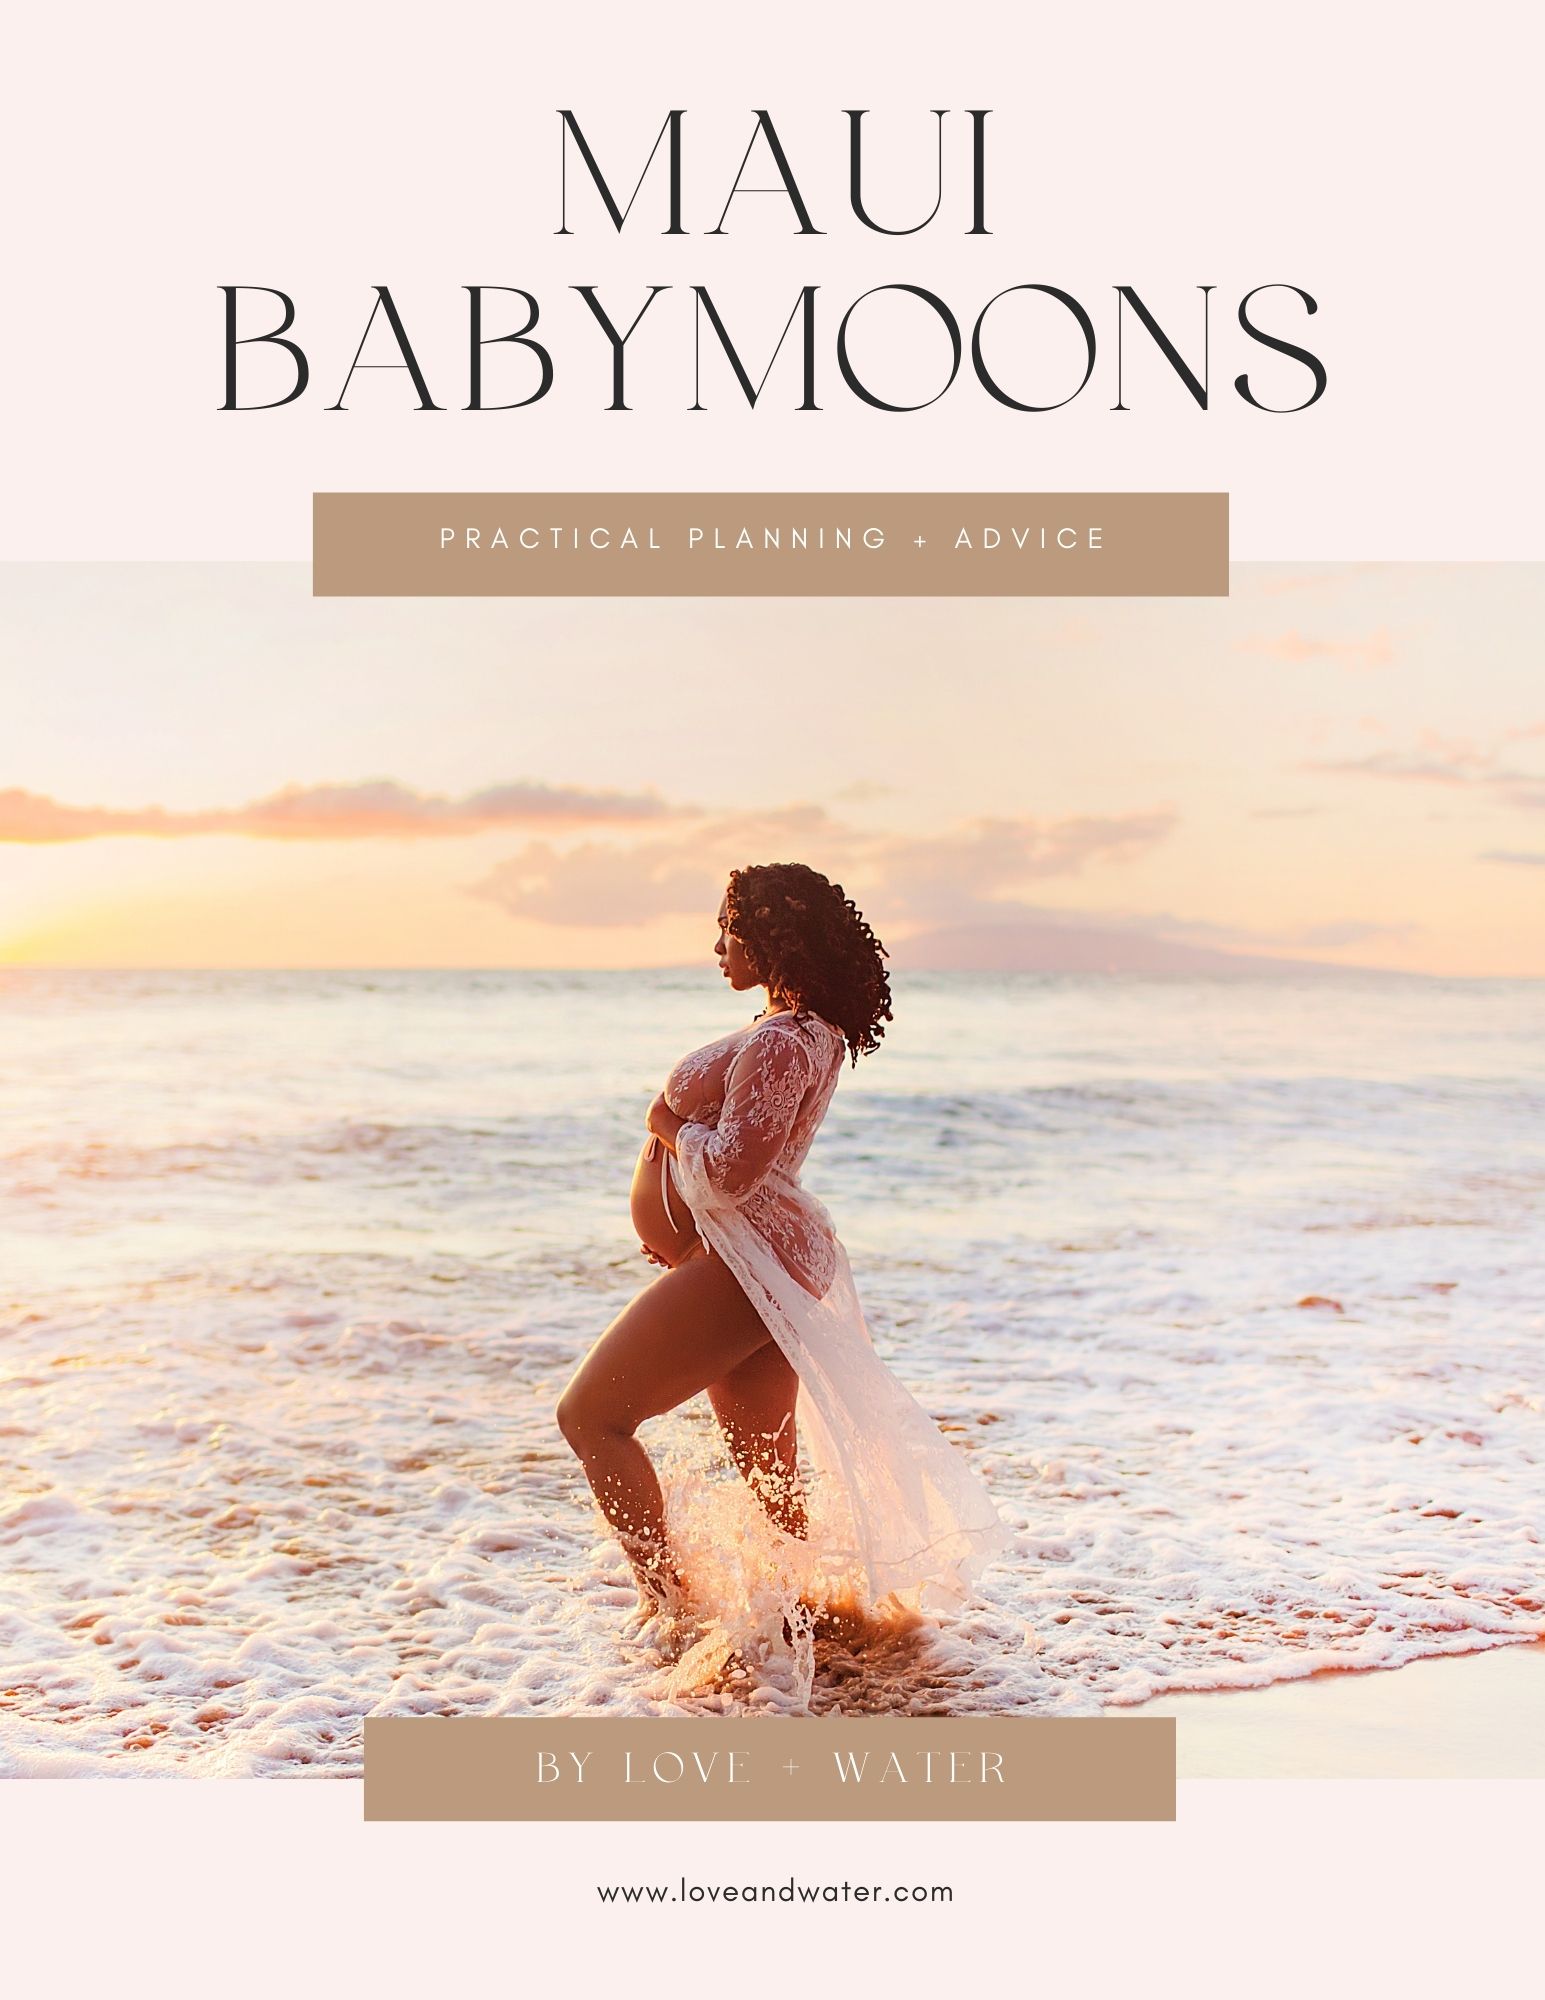 Maui babymoon guide for Hawaii visitors by Love + Water